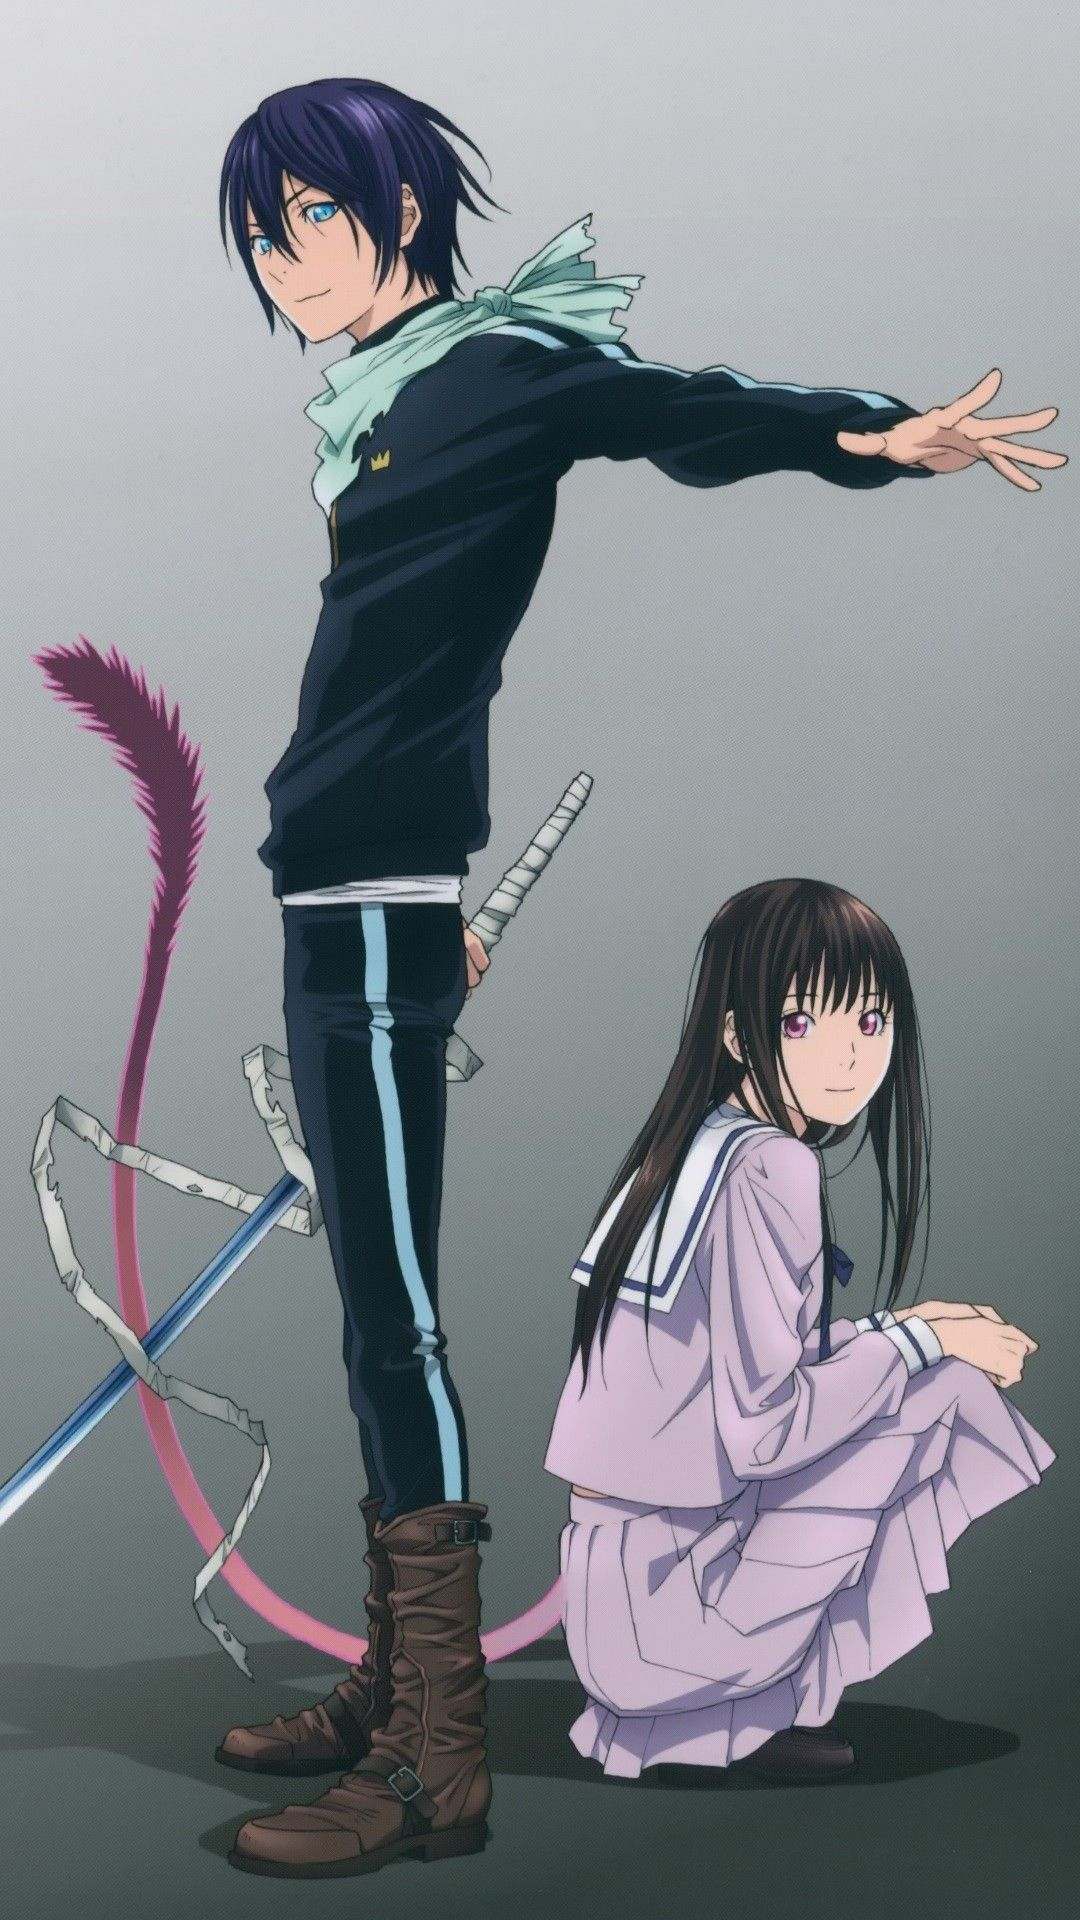 1080x1920 Noragami iPhone Wallpapers Top Free Noragami iPhone Backgrounds